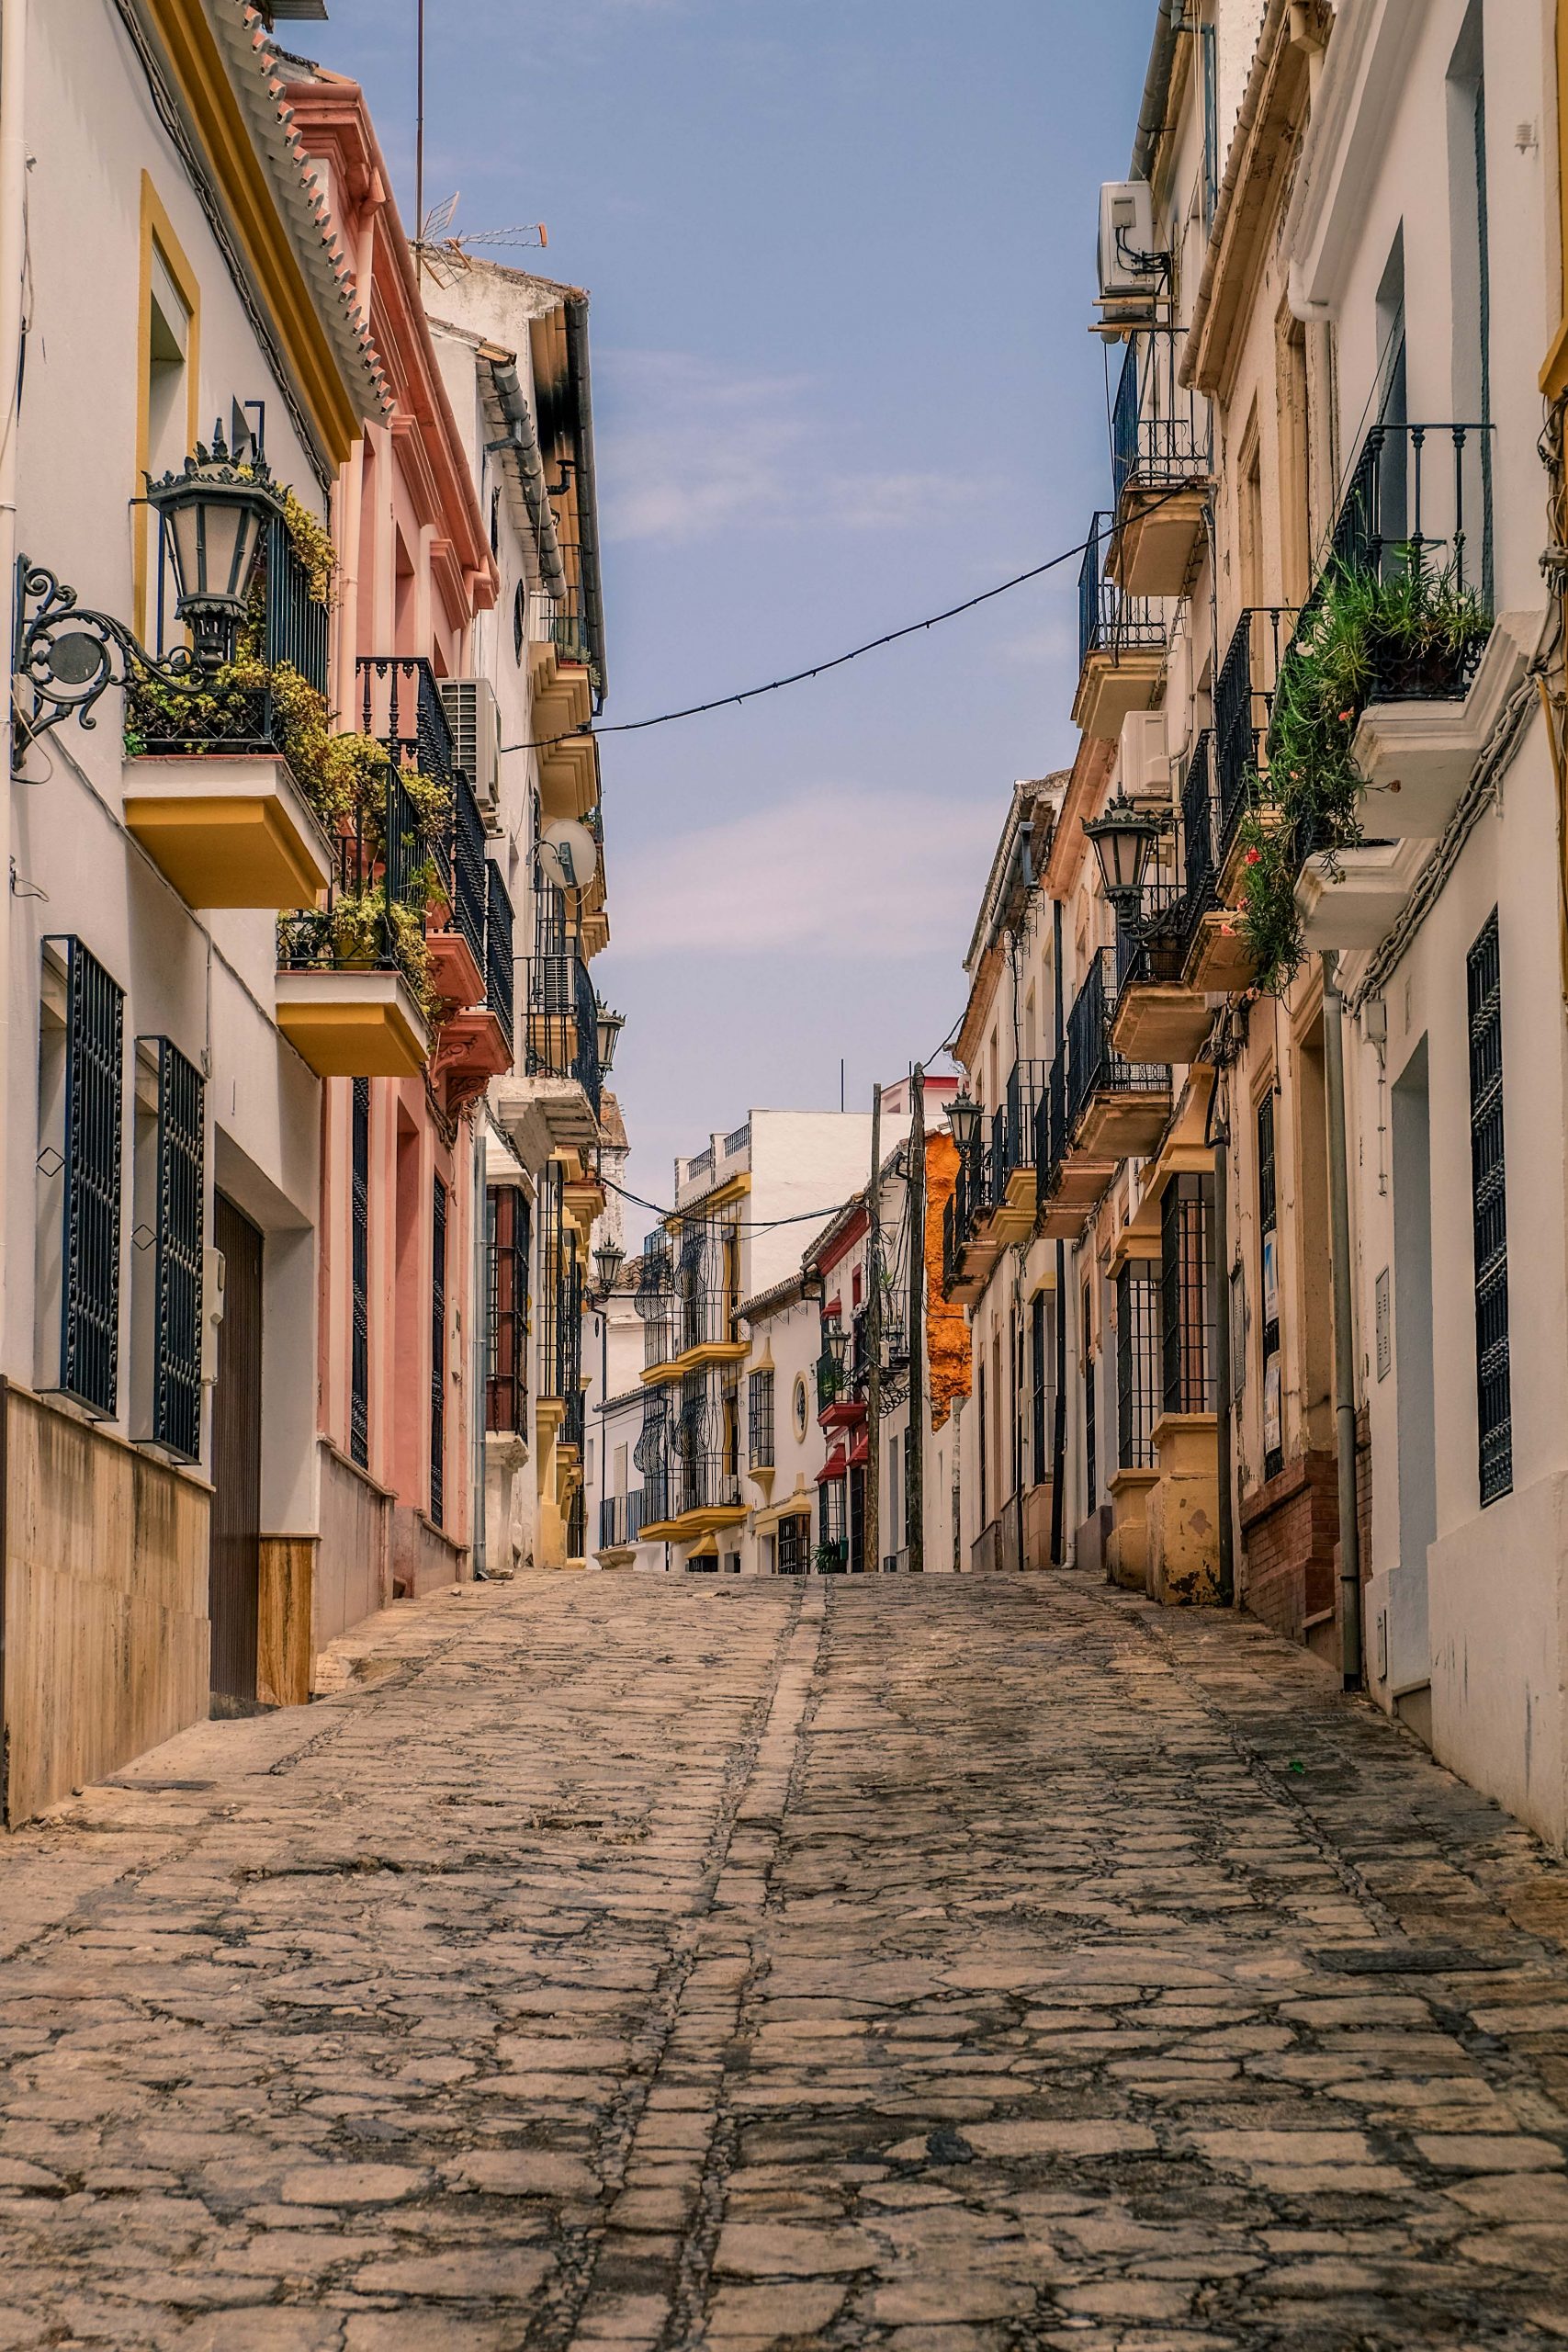 The streets of Seville during the summer